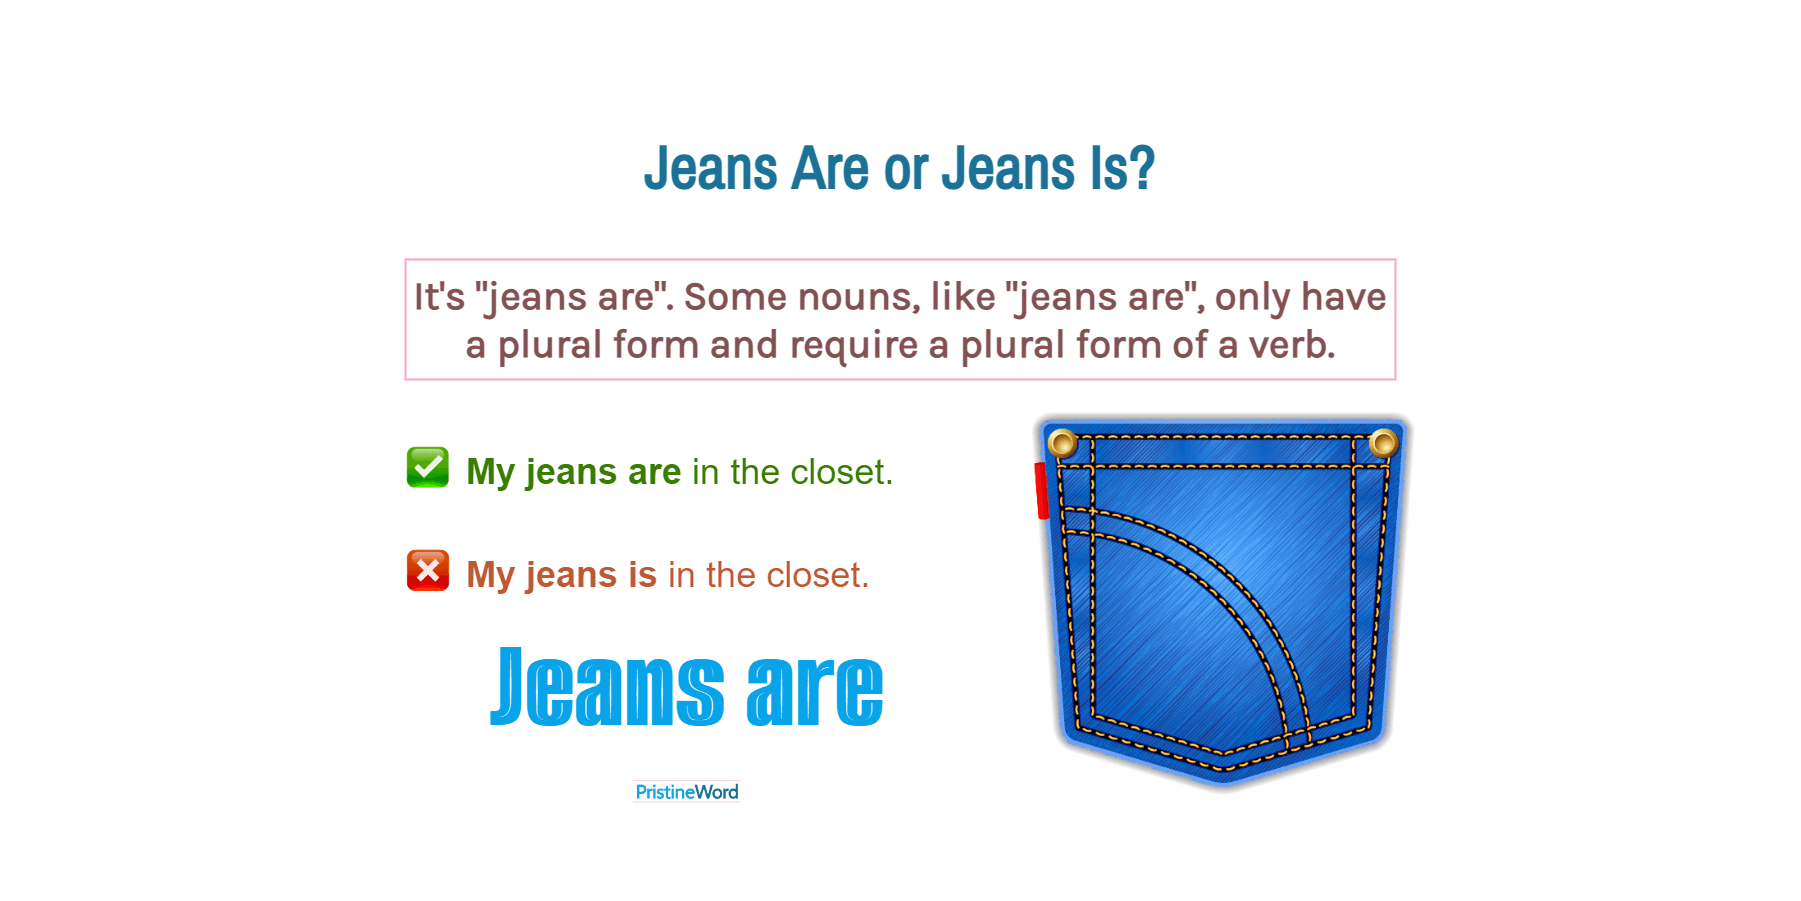 Jeans Are Or Jeans Is. Which Is Correct?